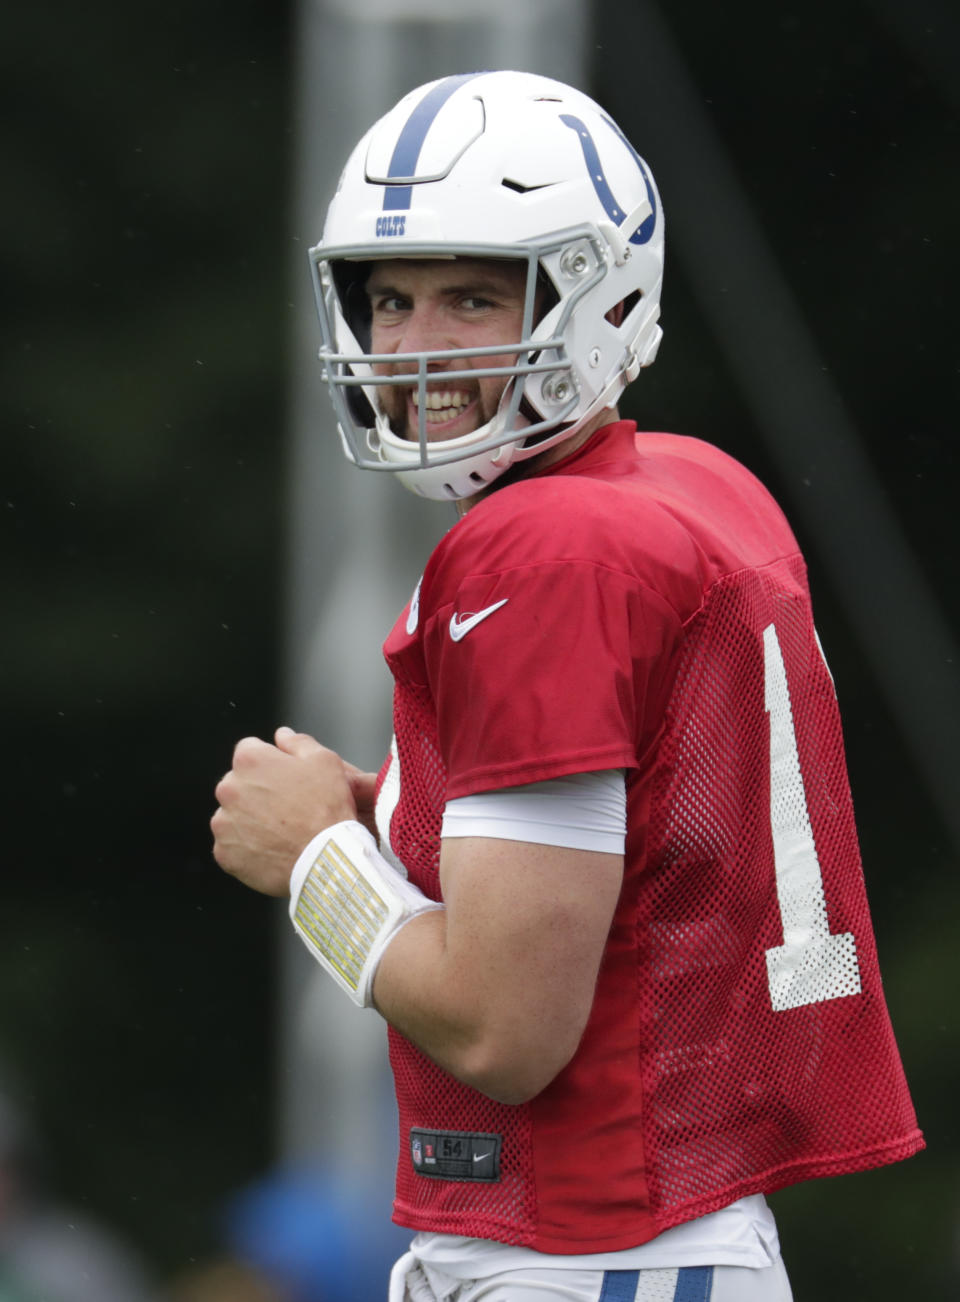 Indianapolis Colts quarterback Andrew Luck (12) smiles as he throws during practice at the NFL team's football training camp in Westfield, Ind., Sunday, July 29, 2018. (AP Photo/Michael Conroy)